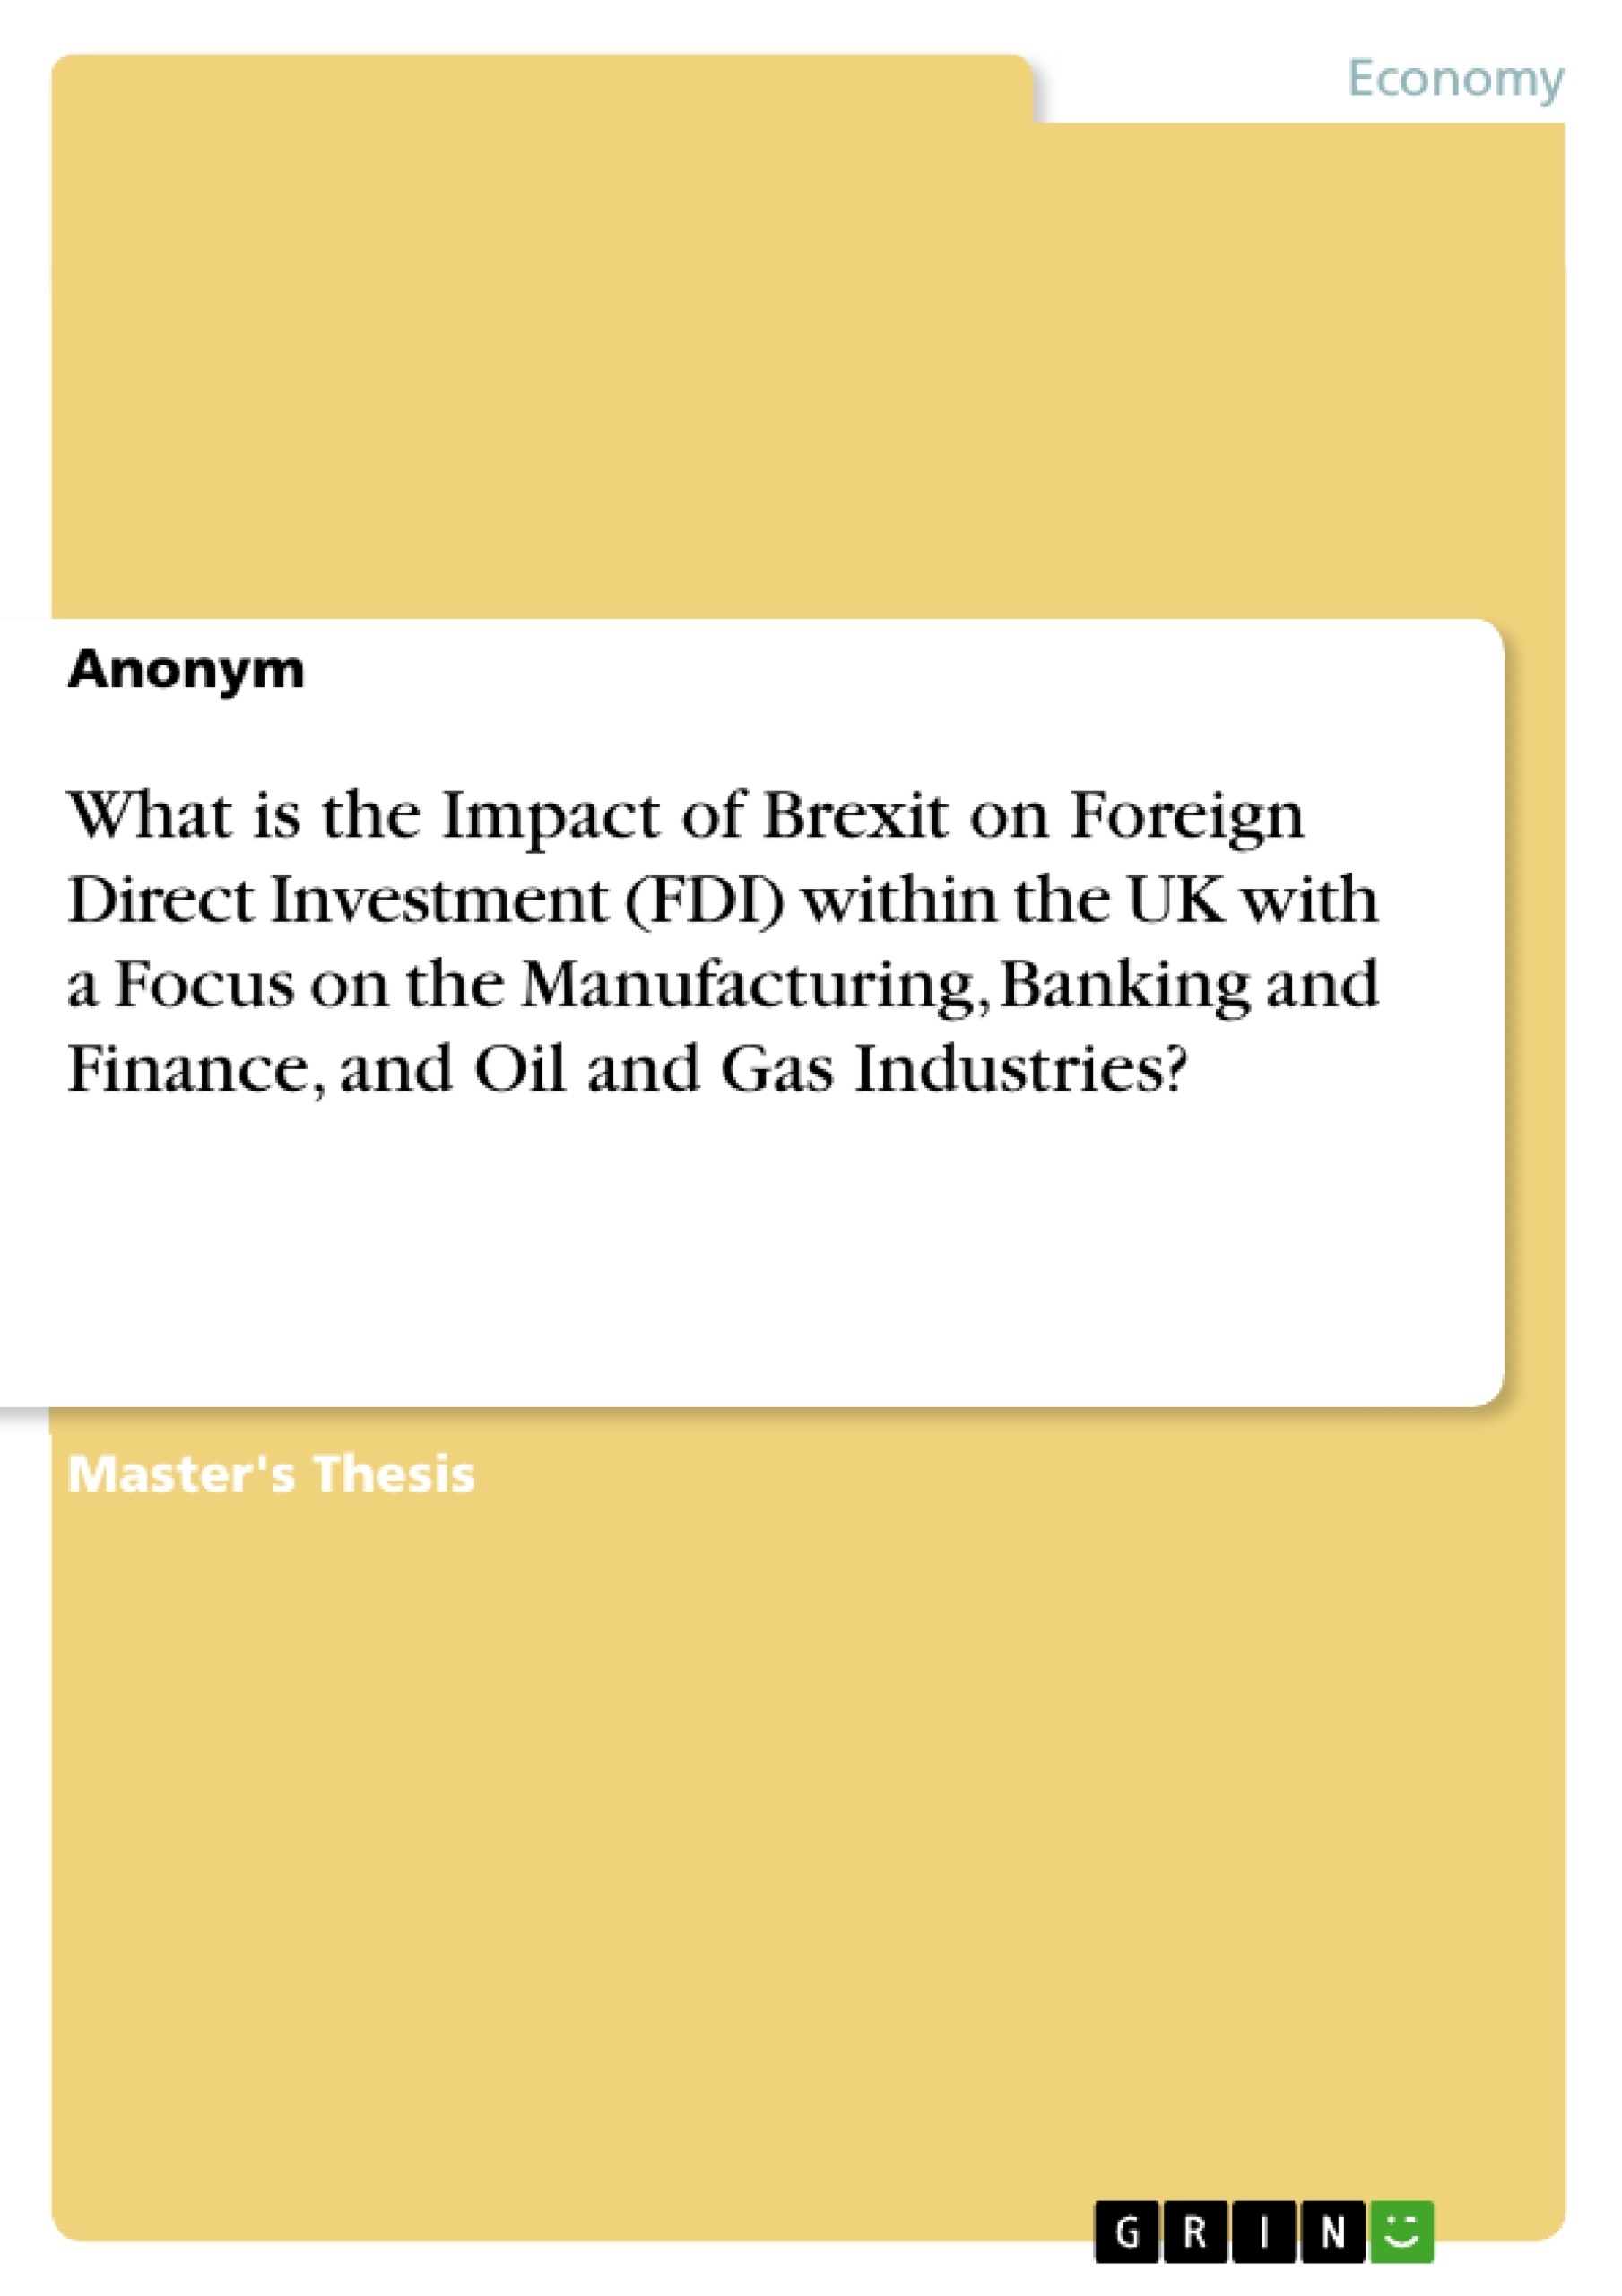 Titre: What is the Impact of Brexit on Foreign Direct Investment (FDI) within the UK with a Focus on the Manufacturing, Banking and Finance, and Oil and Gas Industries?